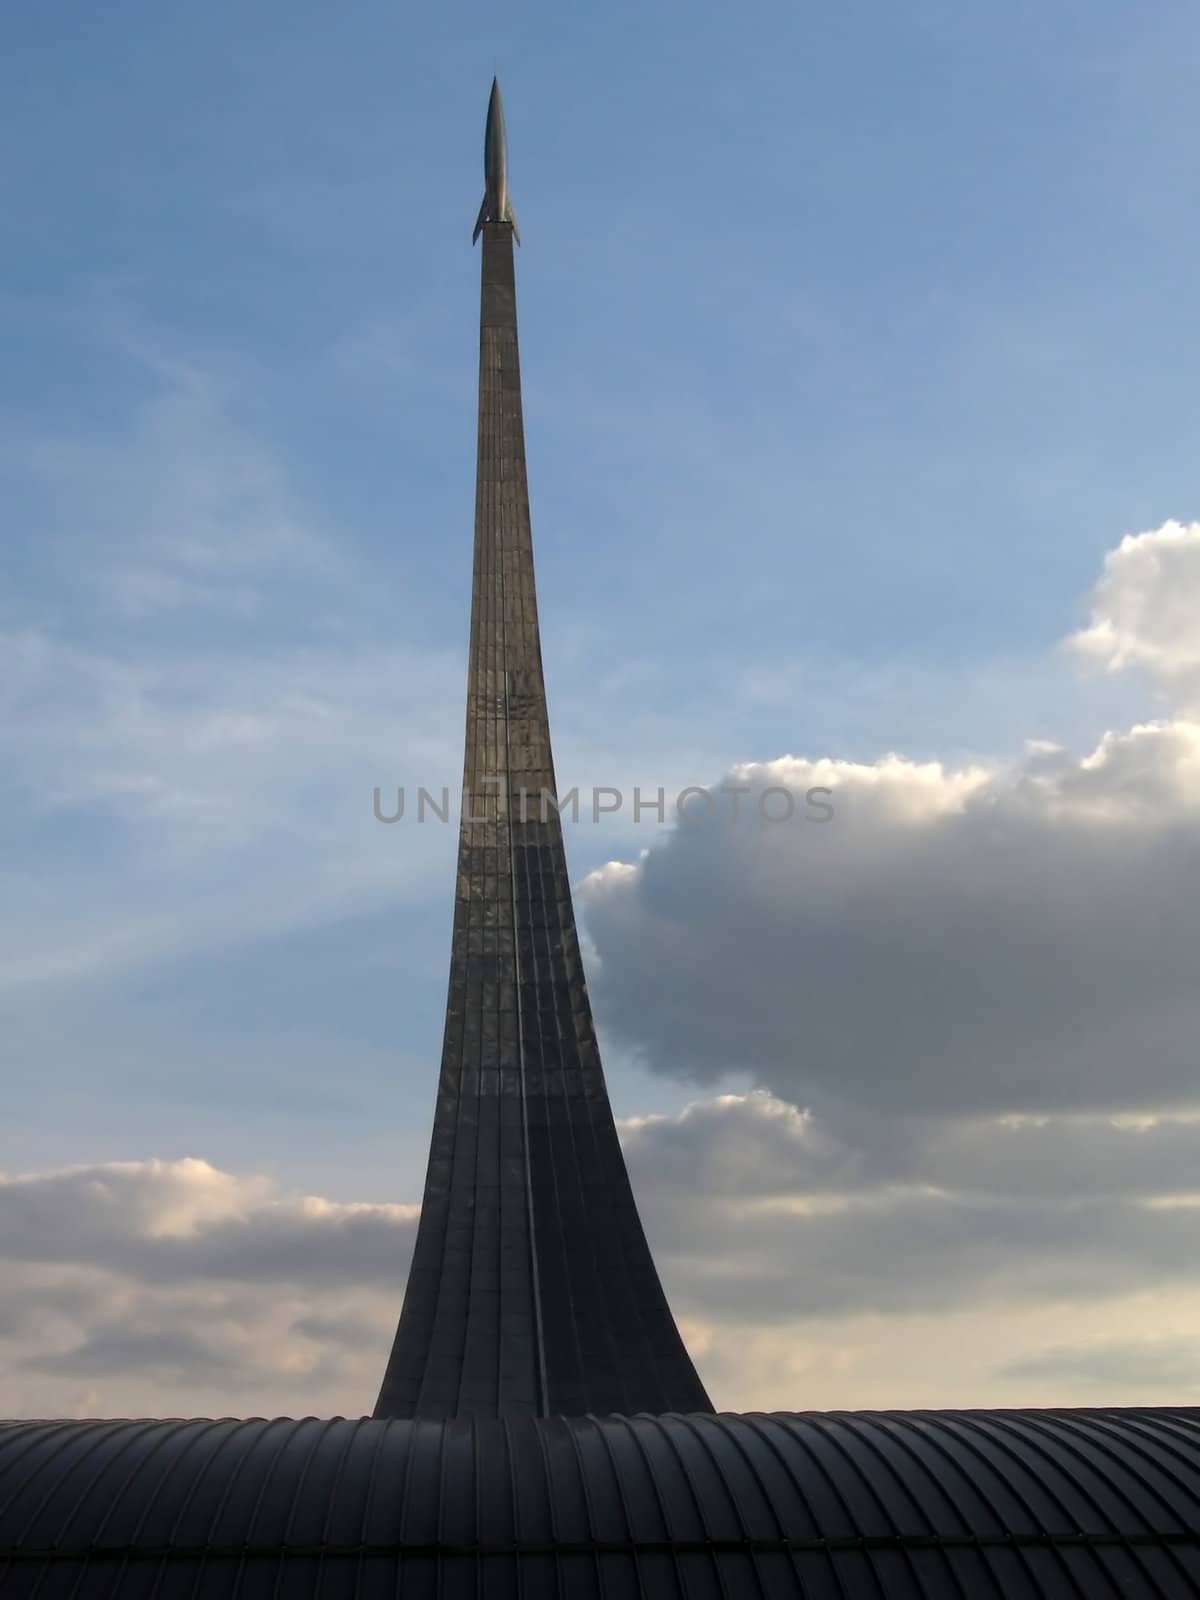 Straight rocket monument by tomatto